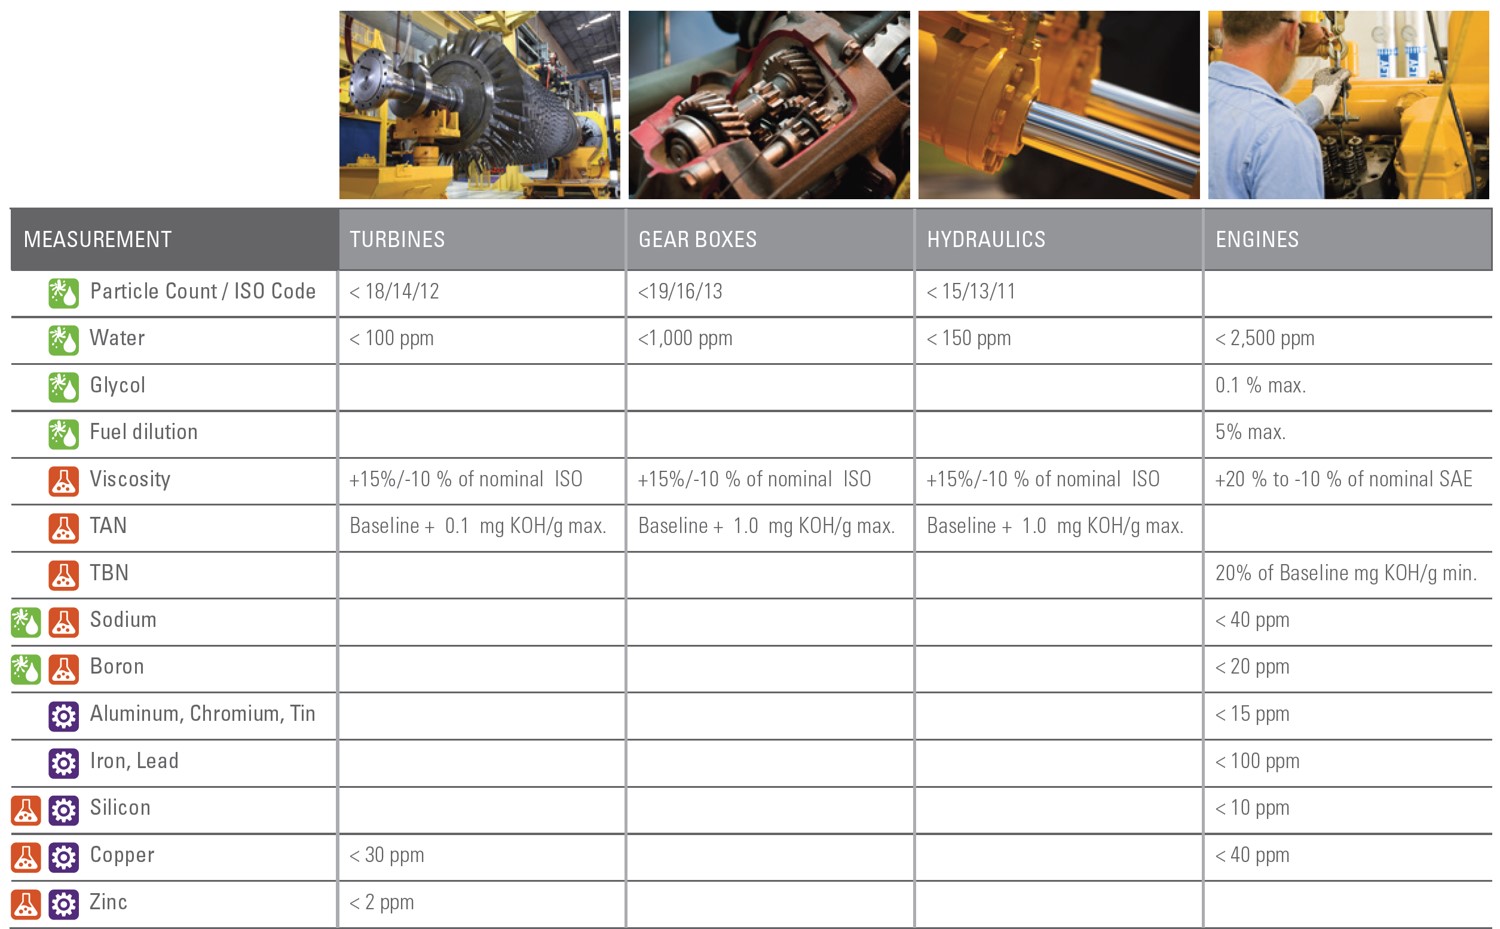 Typical alarm limits for machinery